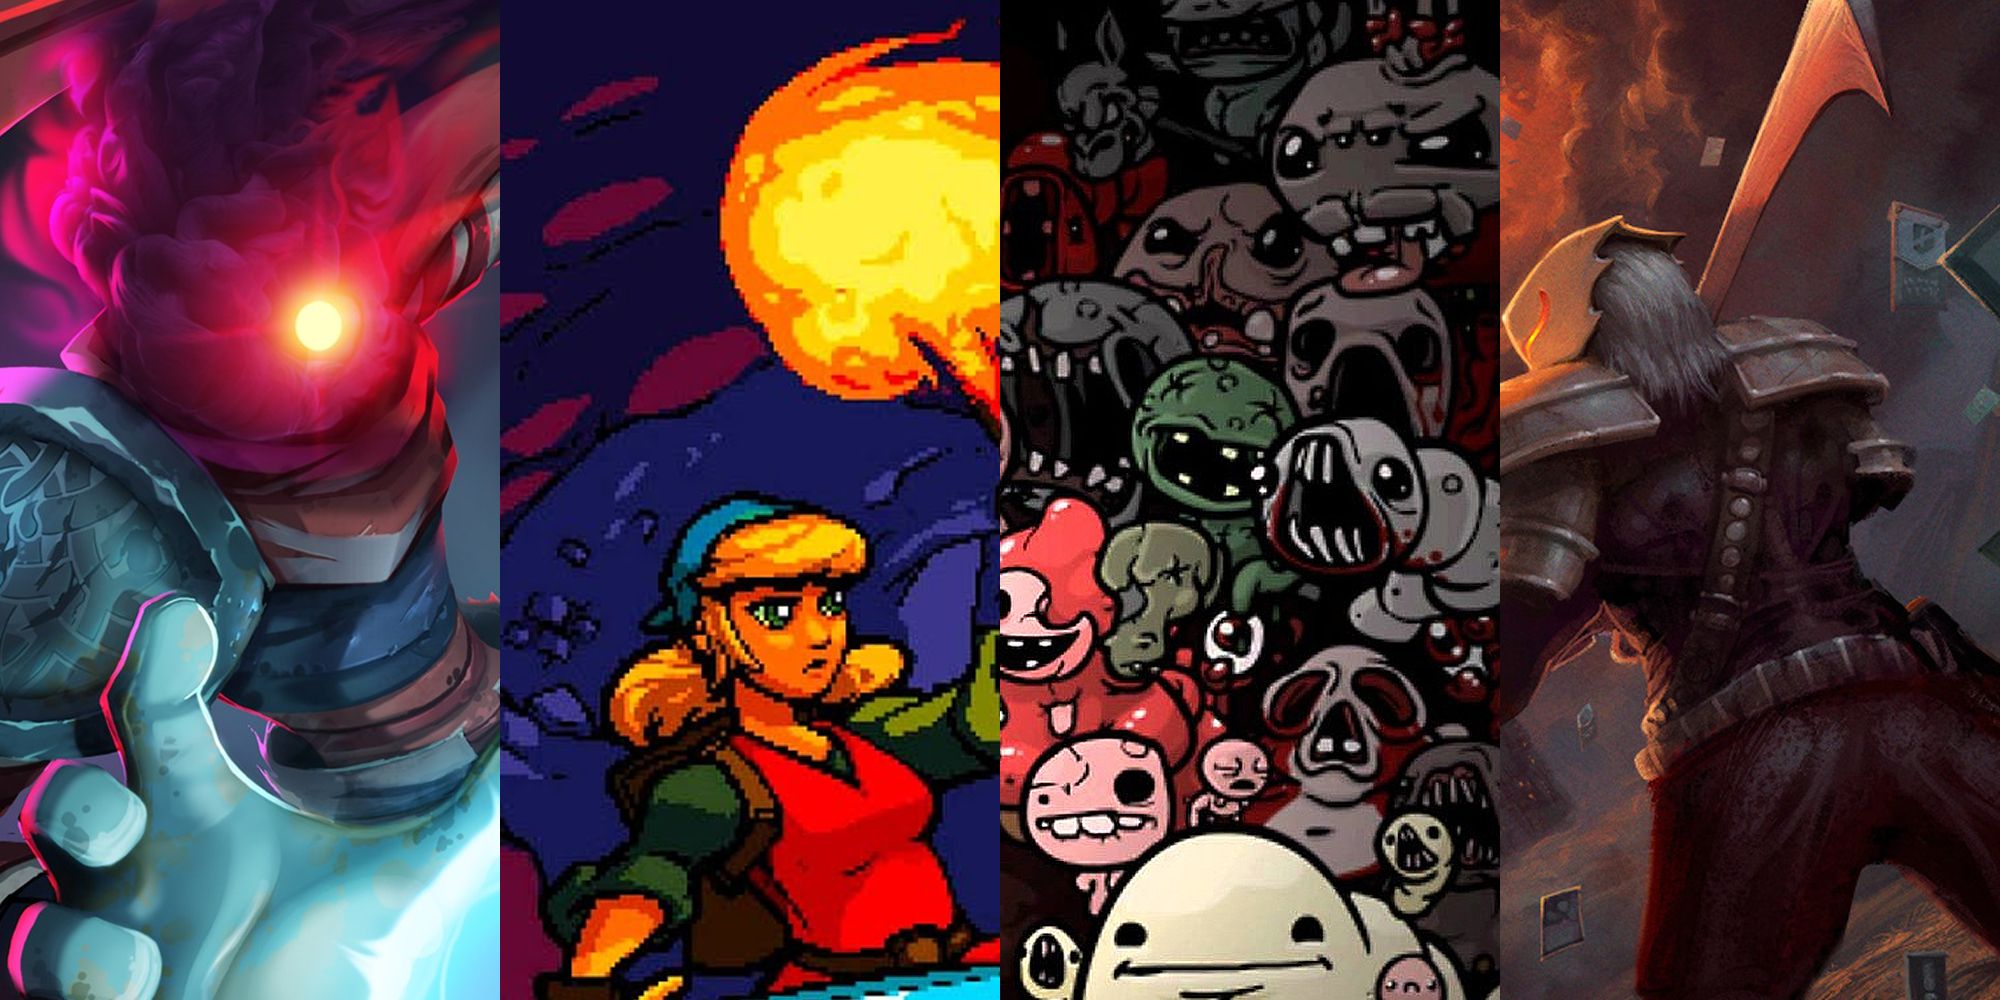 A Split Image Depicting Roguelike games with characters and title art